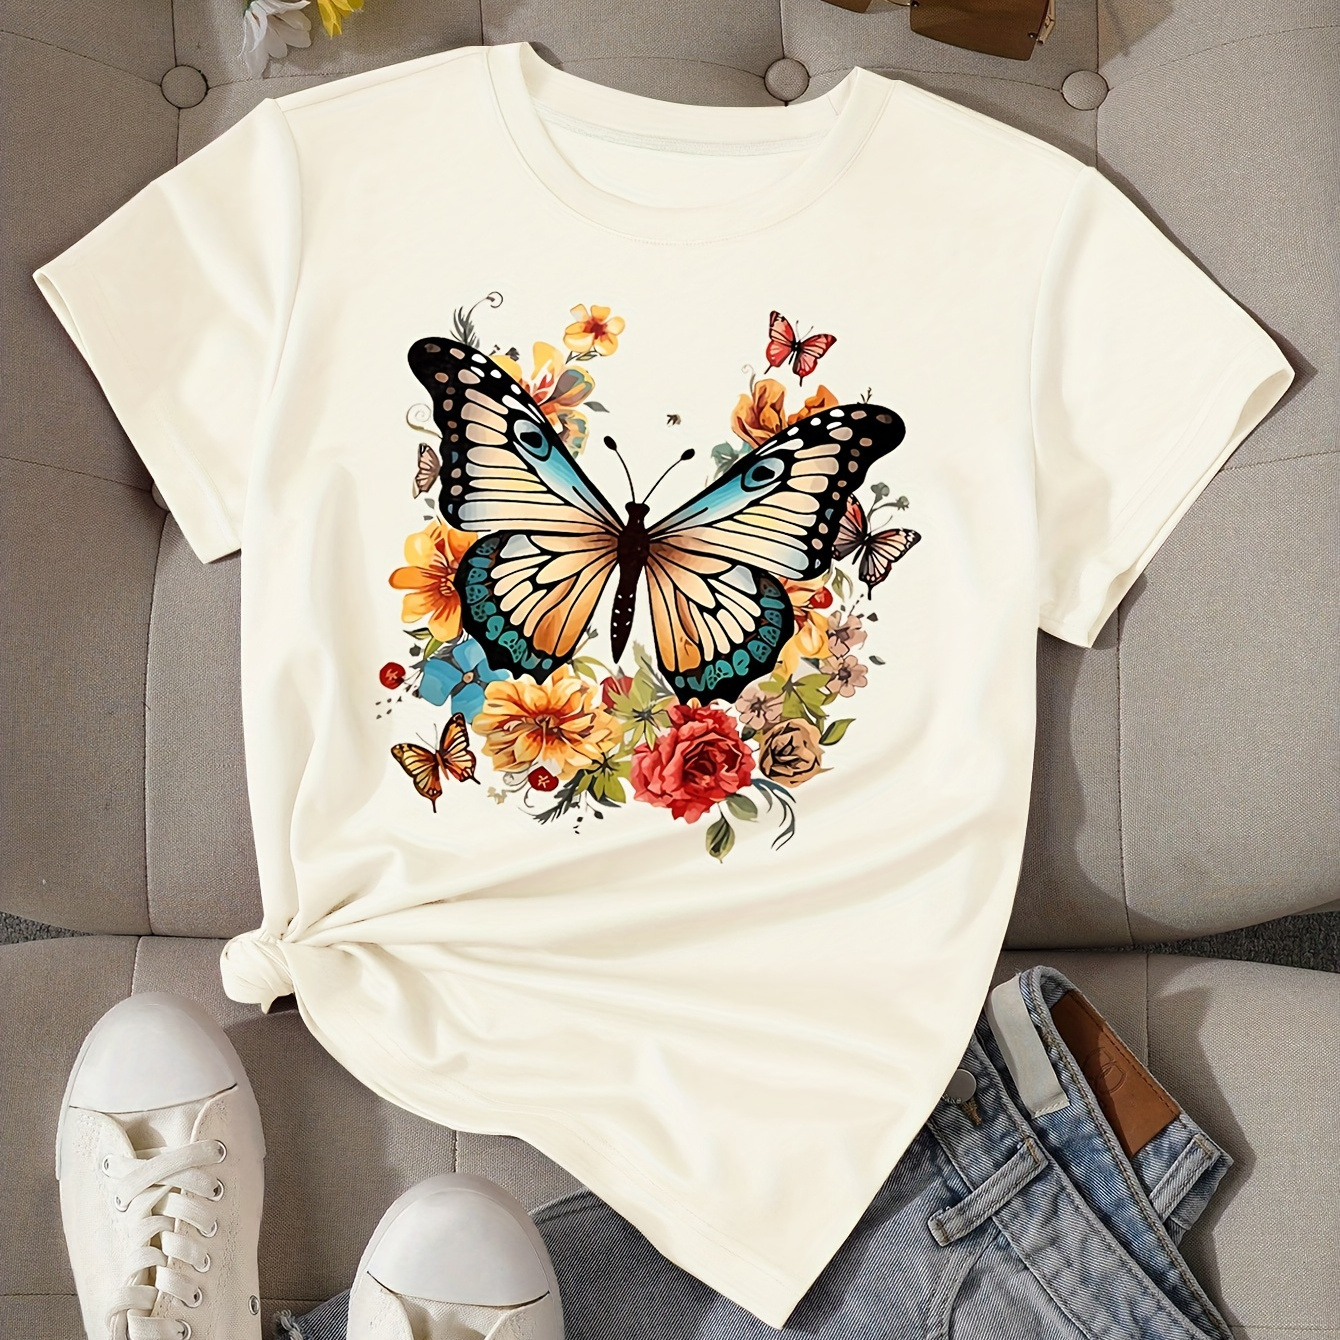 

Butterfly & Floral Print T-shirt, Short Sleeve Crew Neck Casual Top For Summer & Spring, Women's Clothing